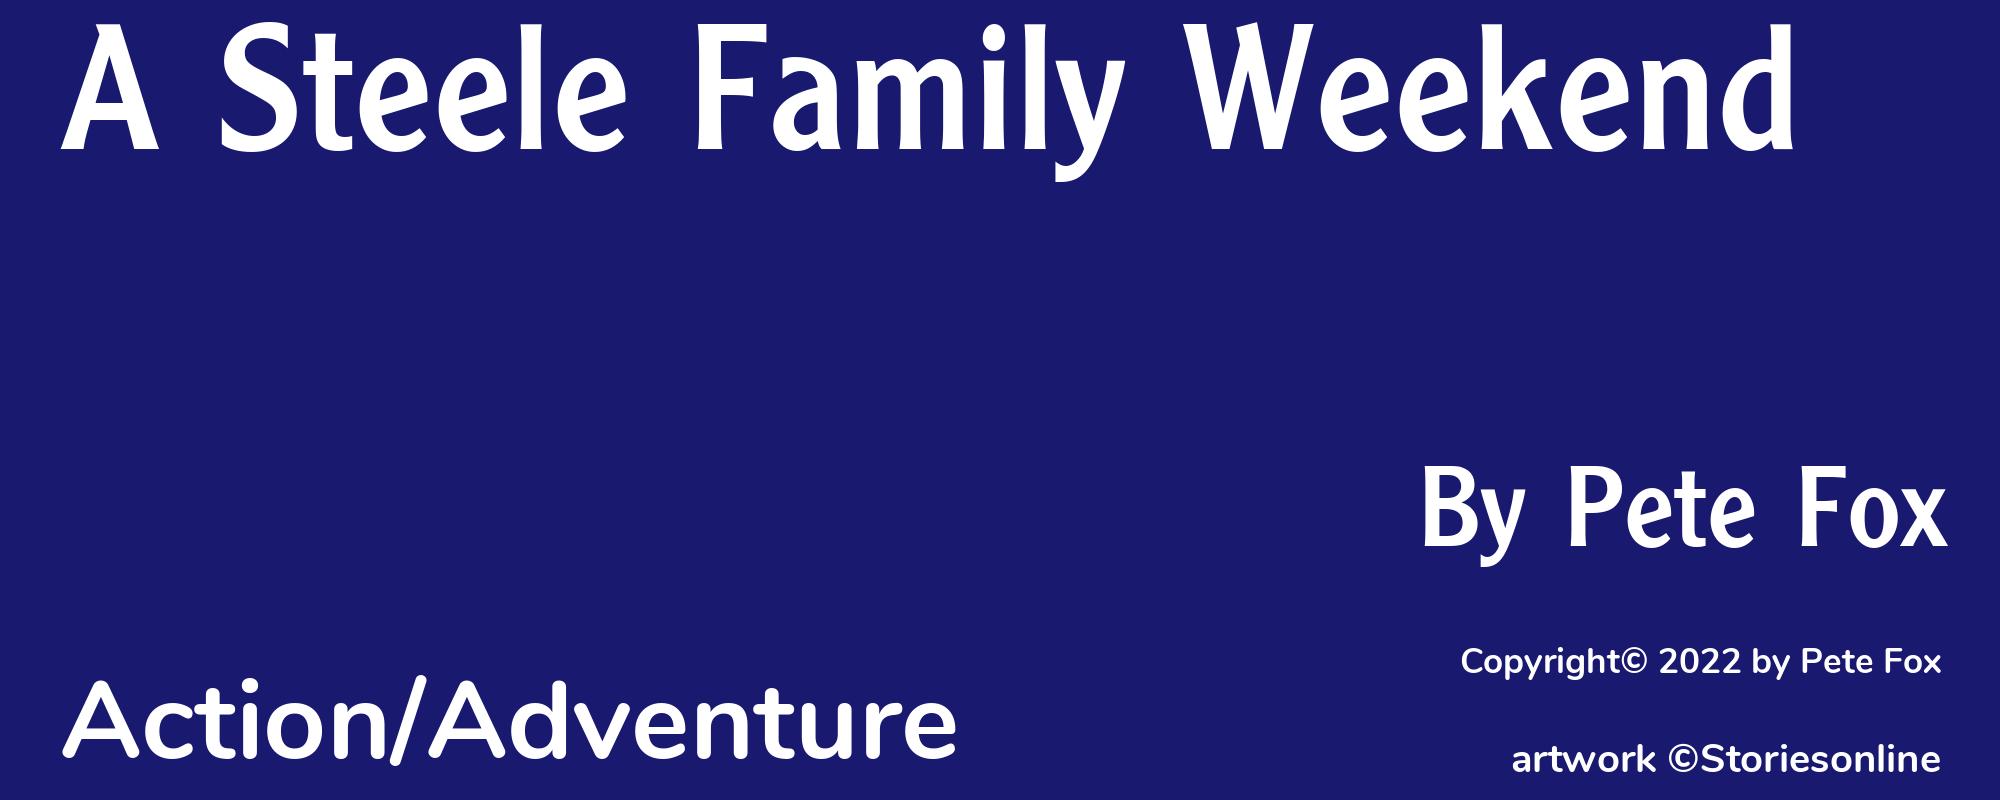 A Steele Family Weekend - Cover